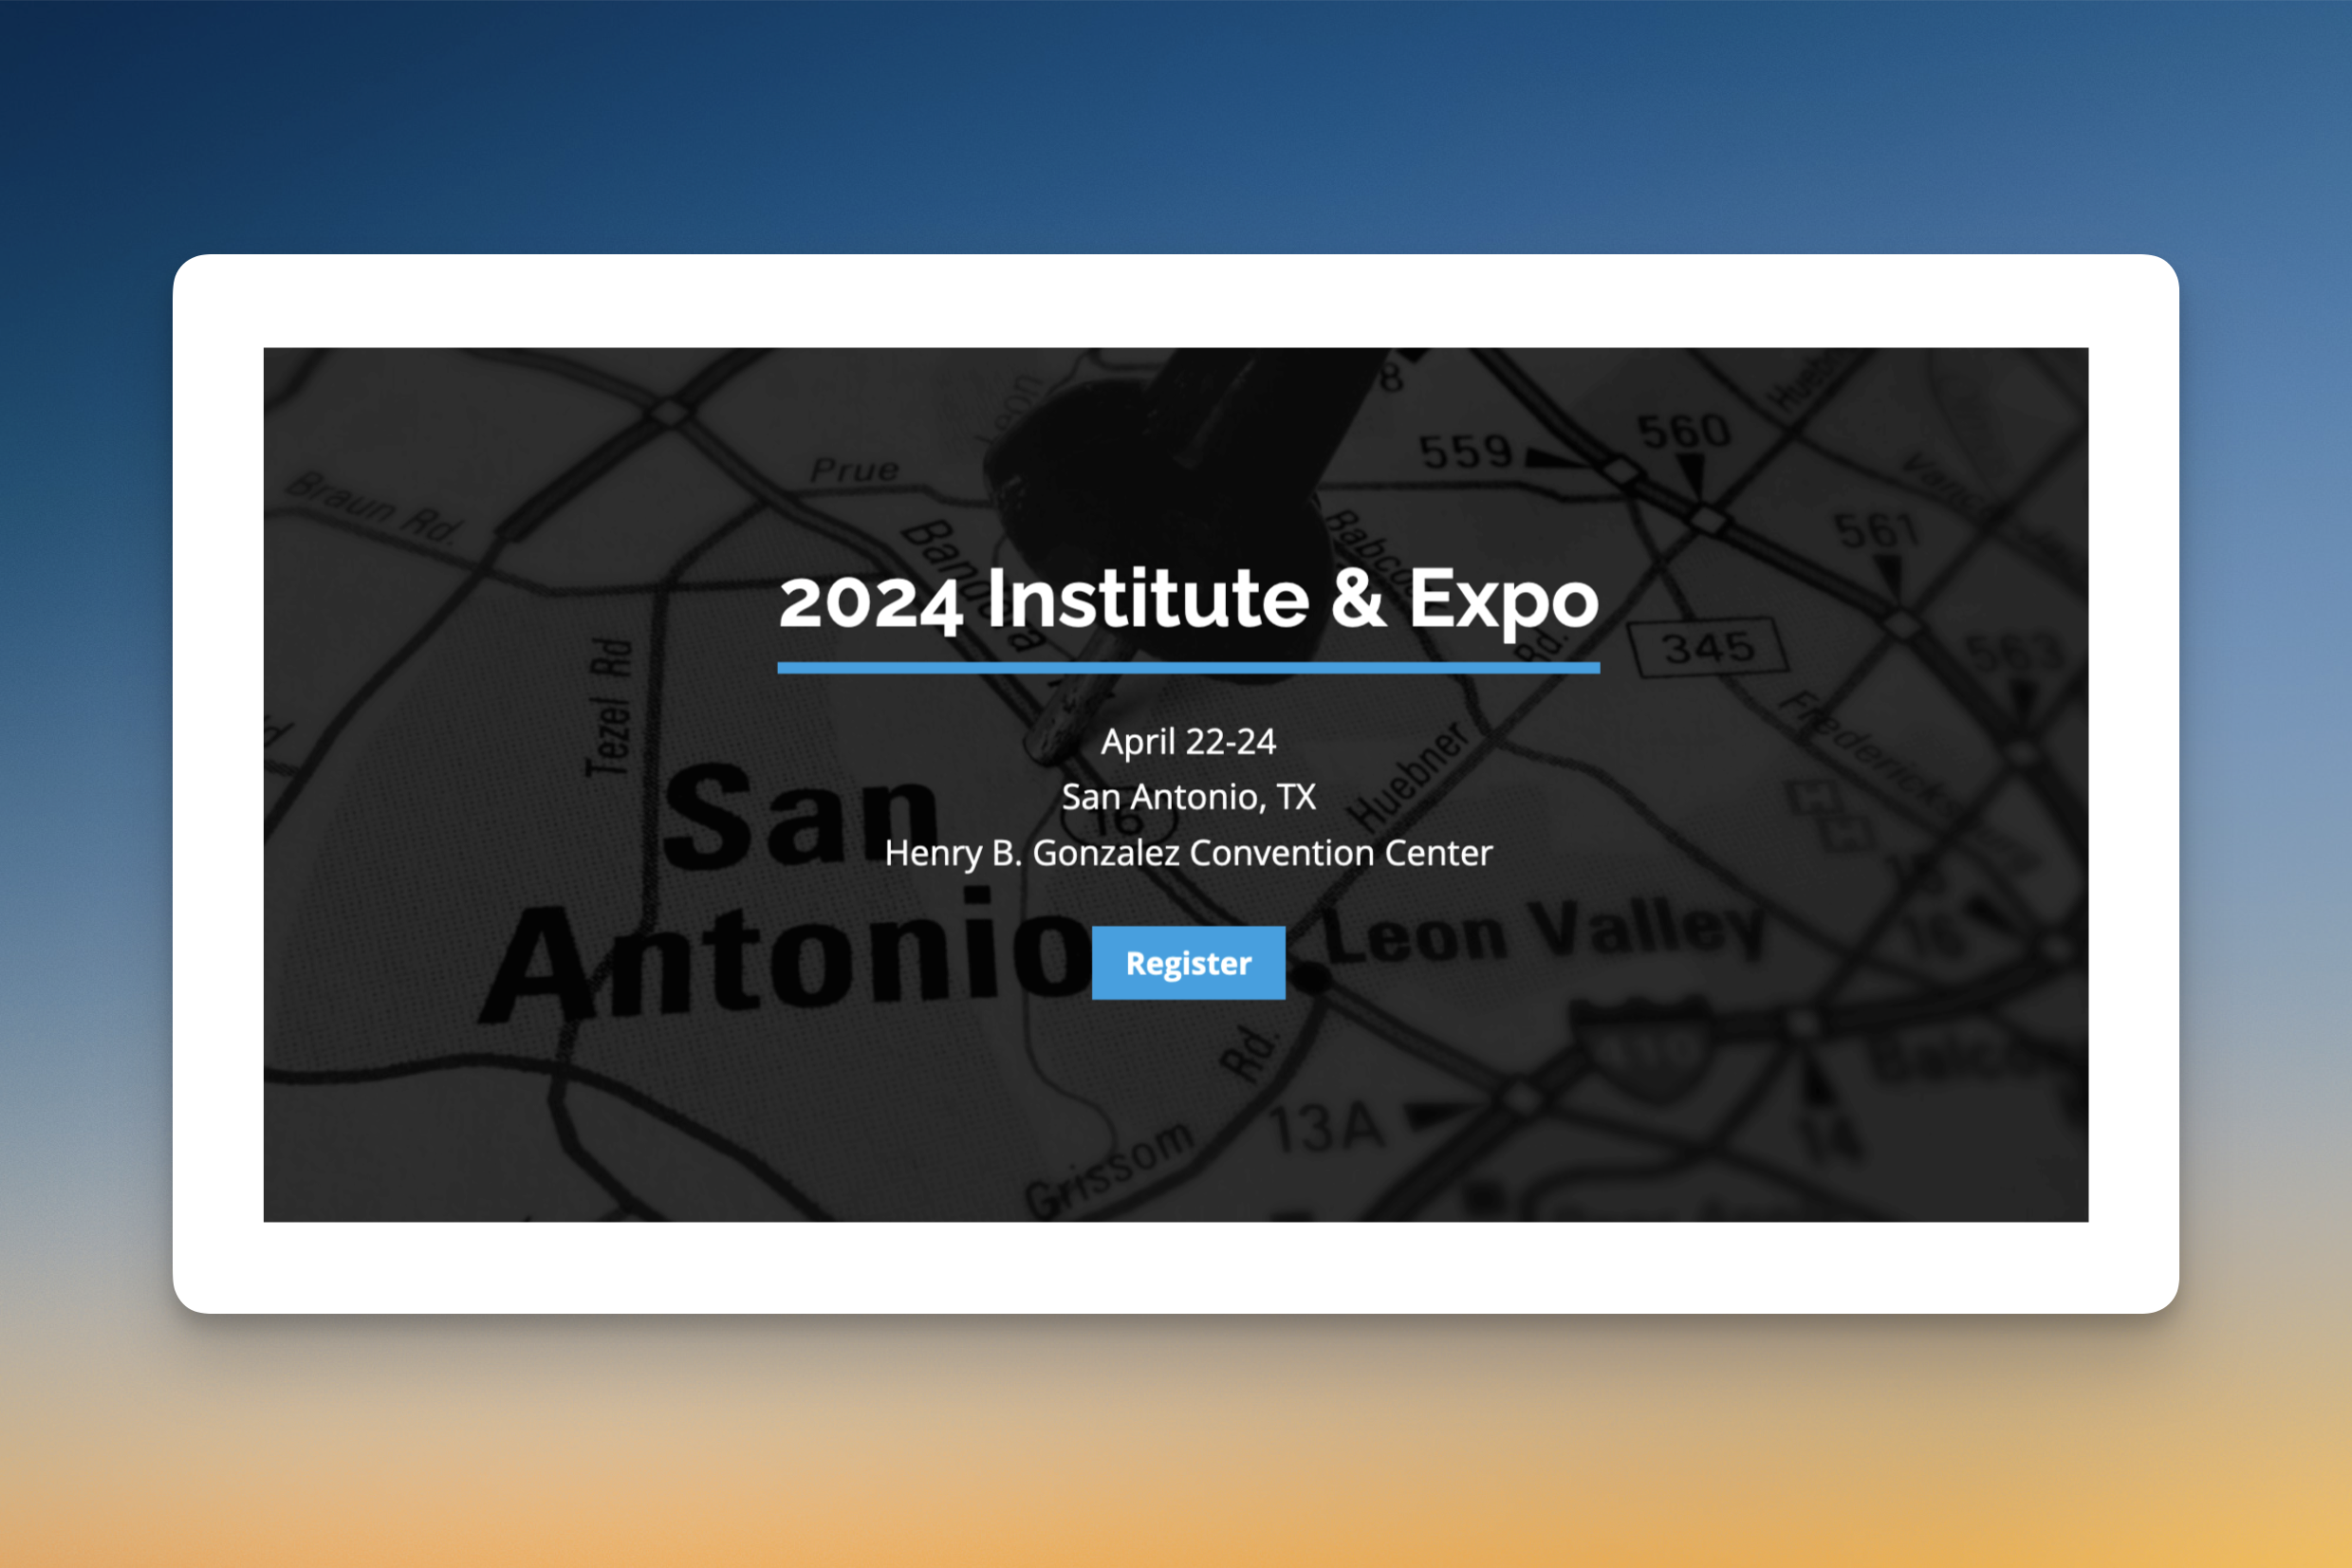 Promotional image for the 2024 Institute & Expo event, taking place from April 22-24 at the Henry B. Gonzalez Convention Center in San Antonio, TX. At the bottom of the image, there is a 'Register' button. The background features a grayscale stylized map of San Antonio with a focus on the city's name.